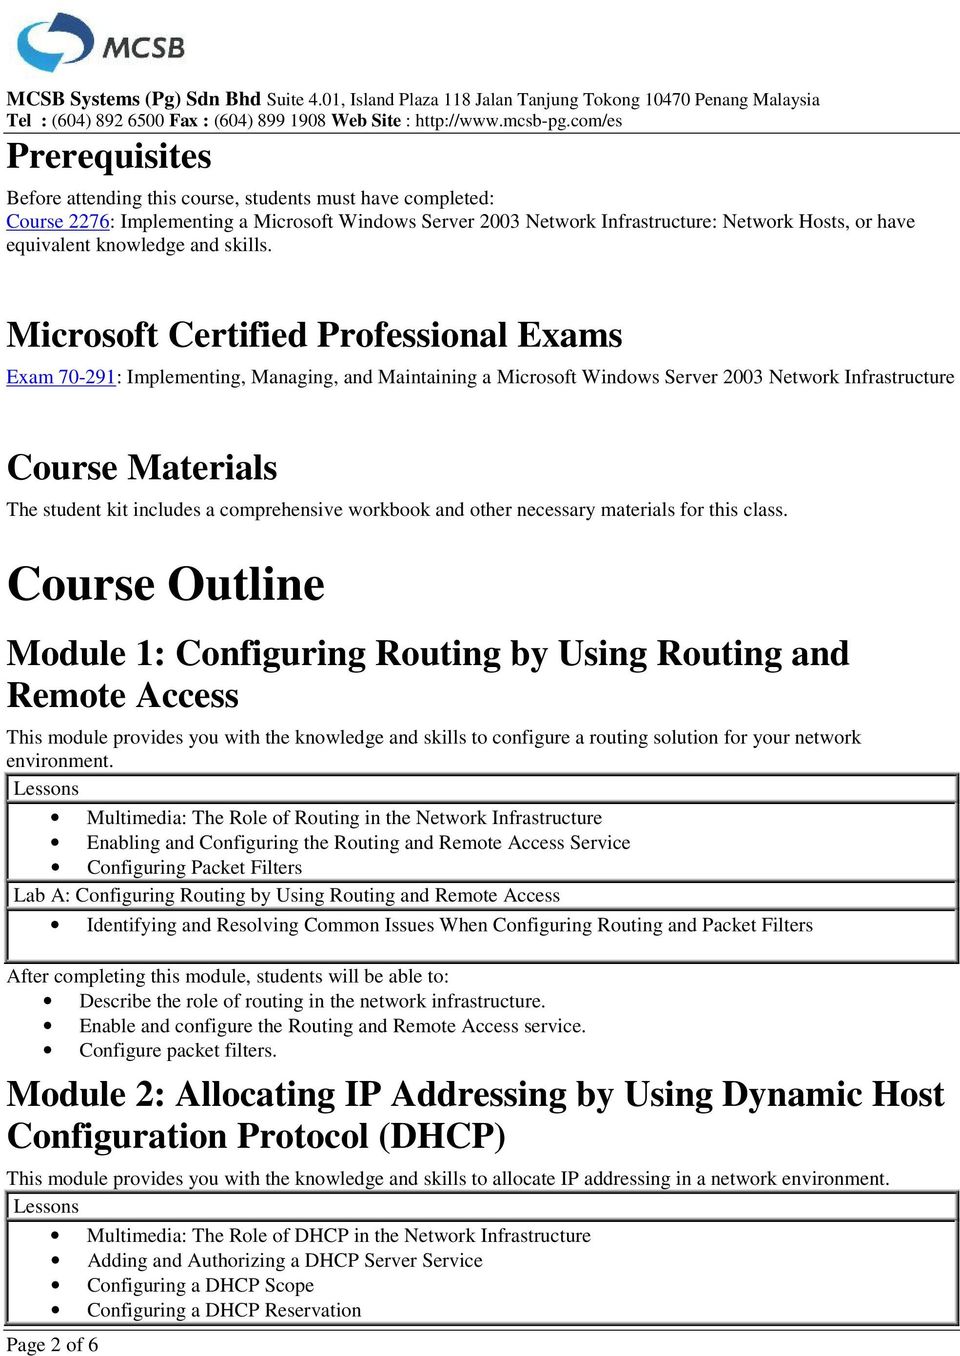 Microsoft Certified Professional Exams Exam 70-291: Implementing, Managing, and Maintaining a Microsoft Windows Server 2003 Network Infrastructure Course Materials The student kit includes a